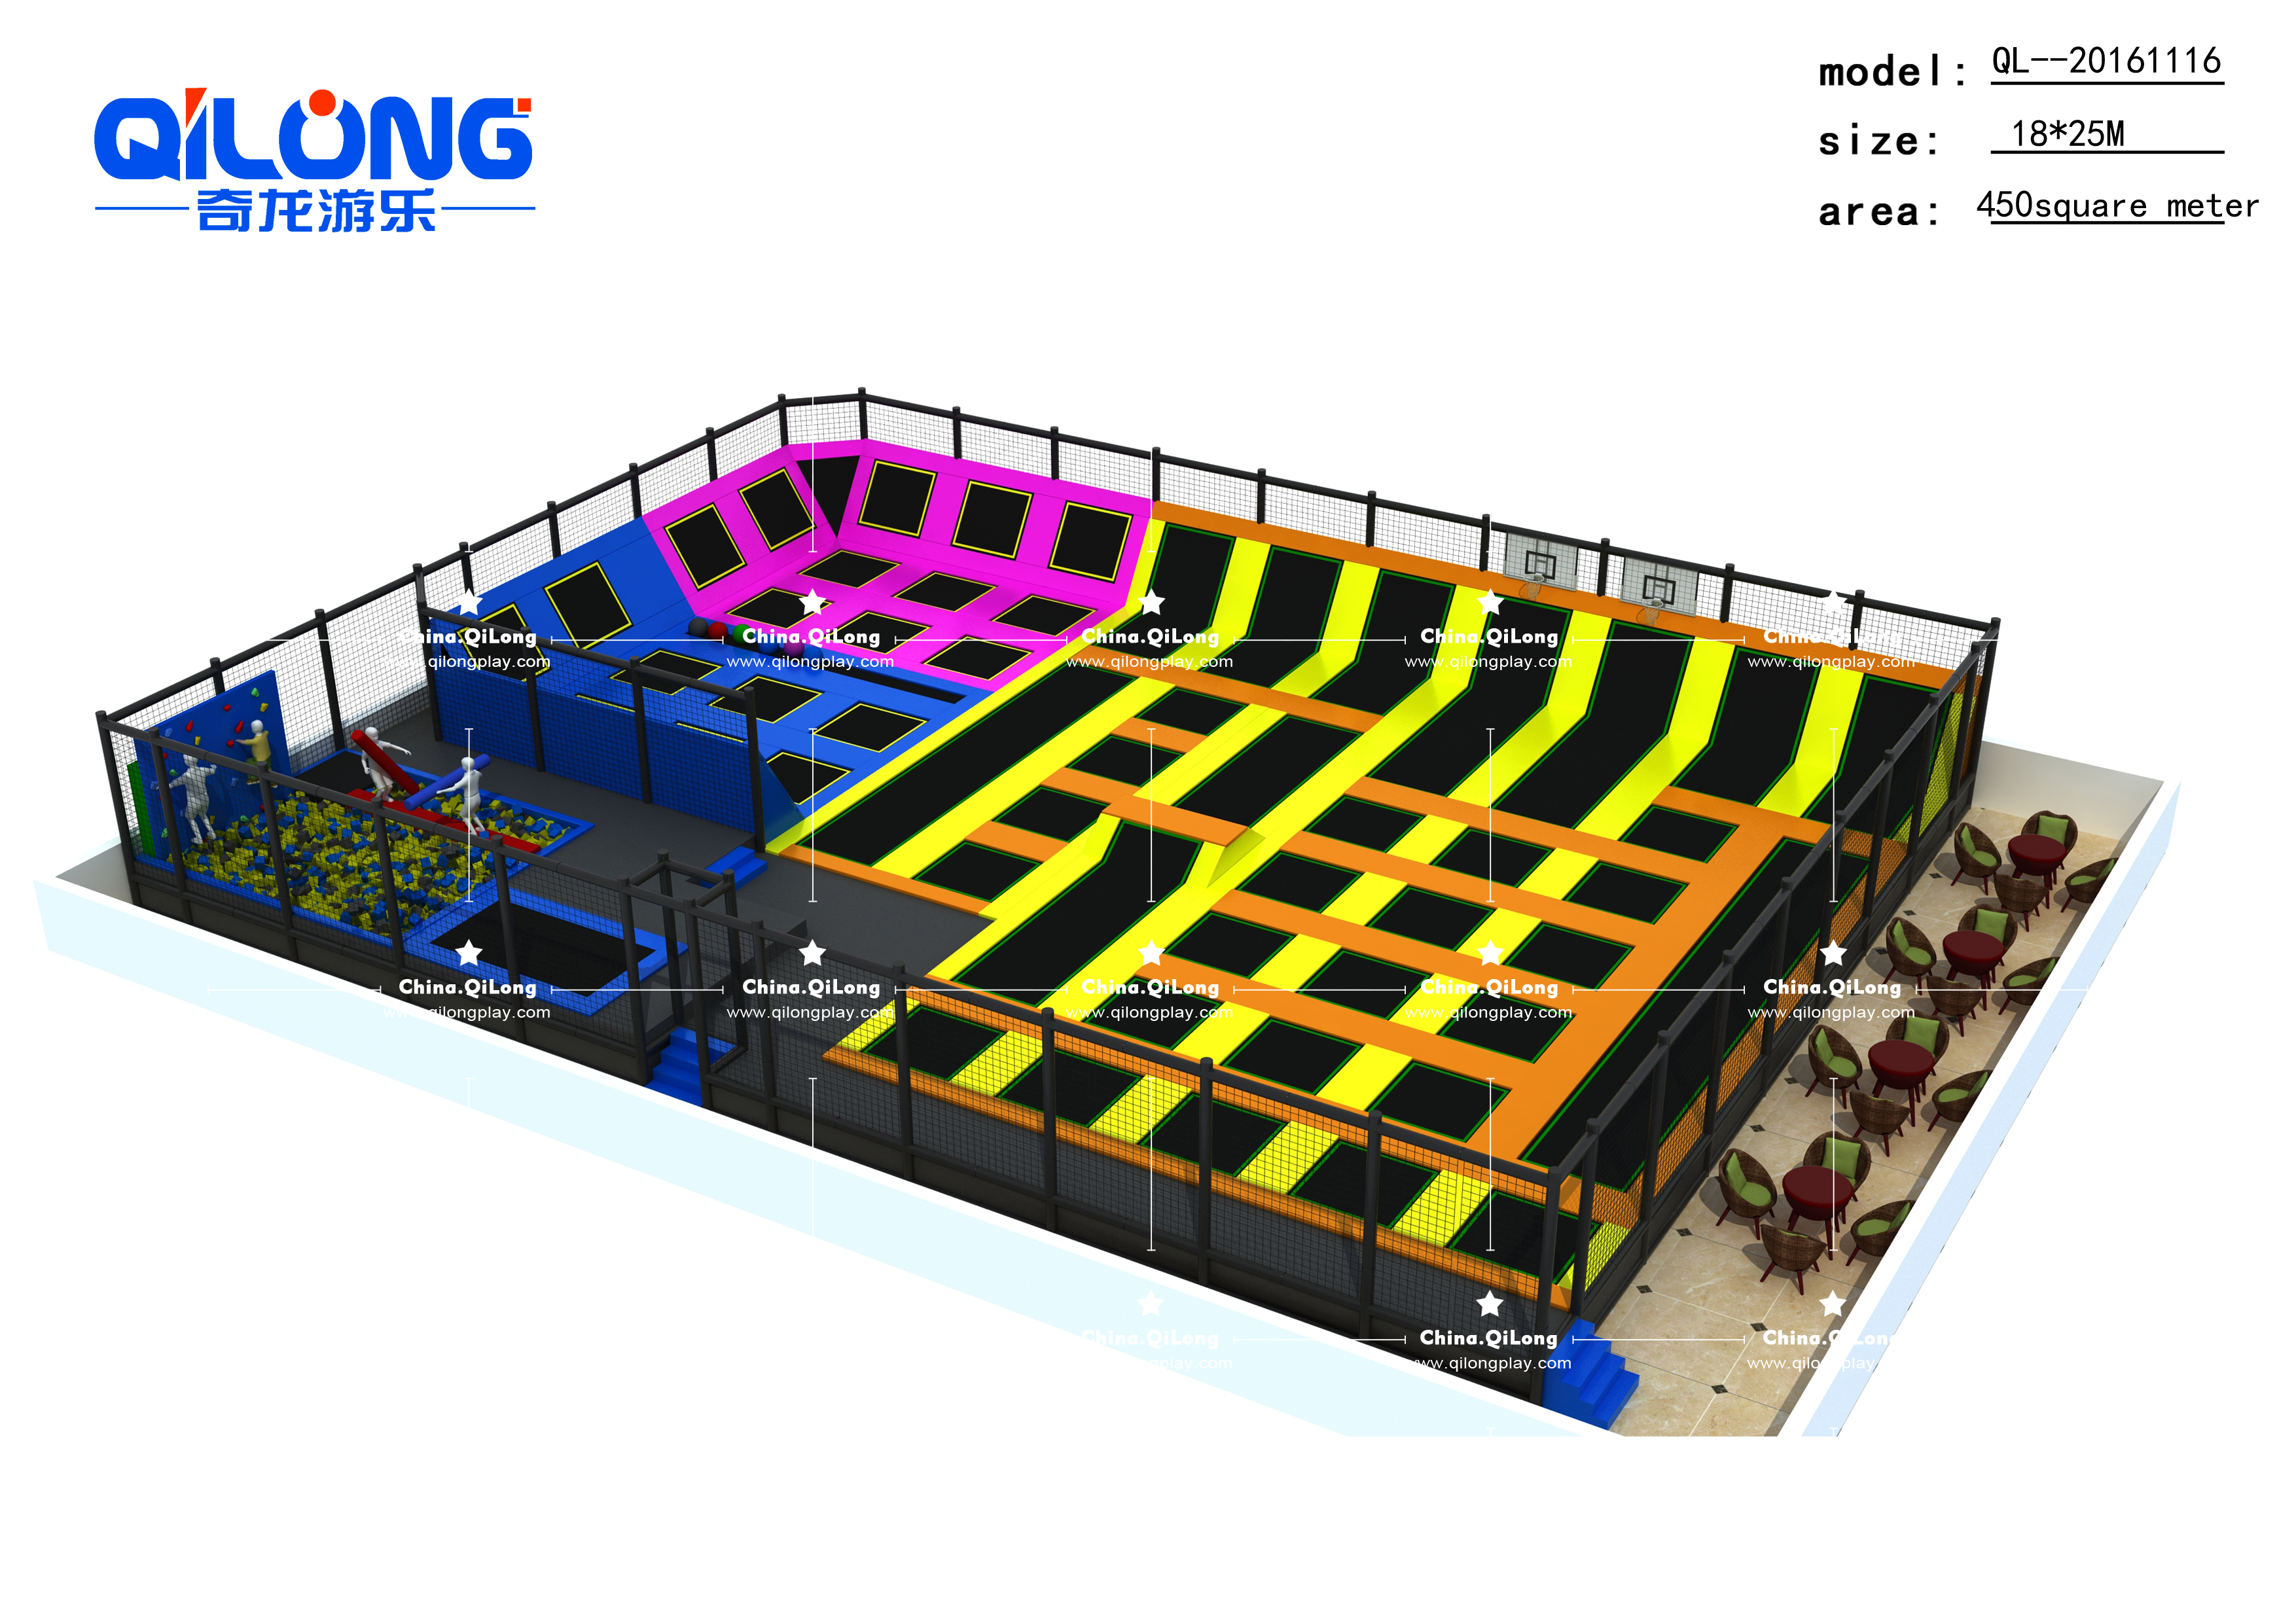 Finished Installing Trampoline Park in South Africa